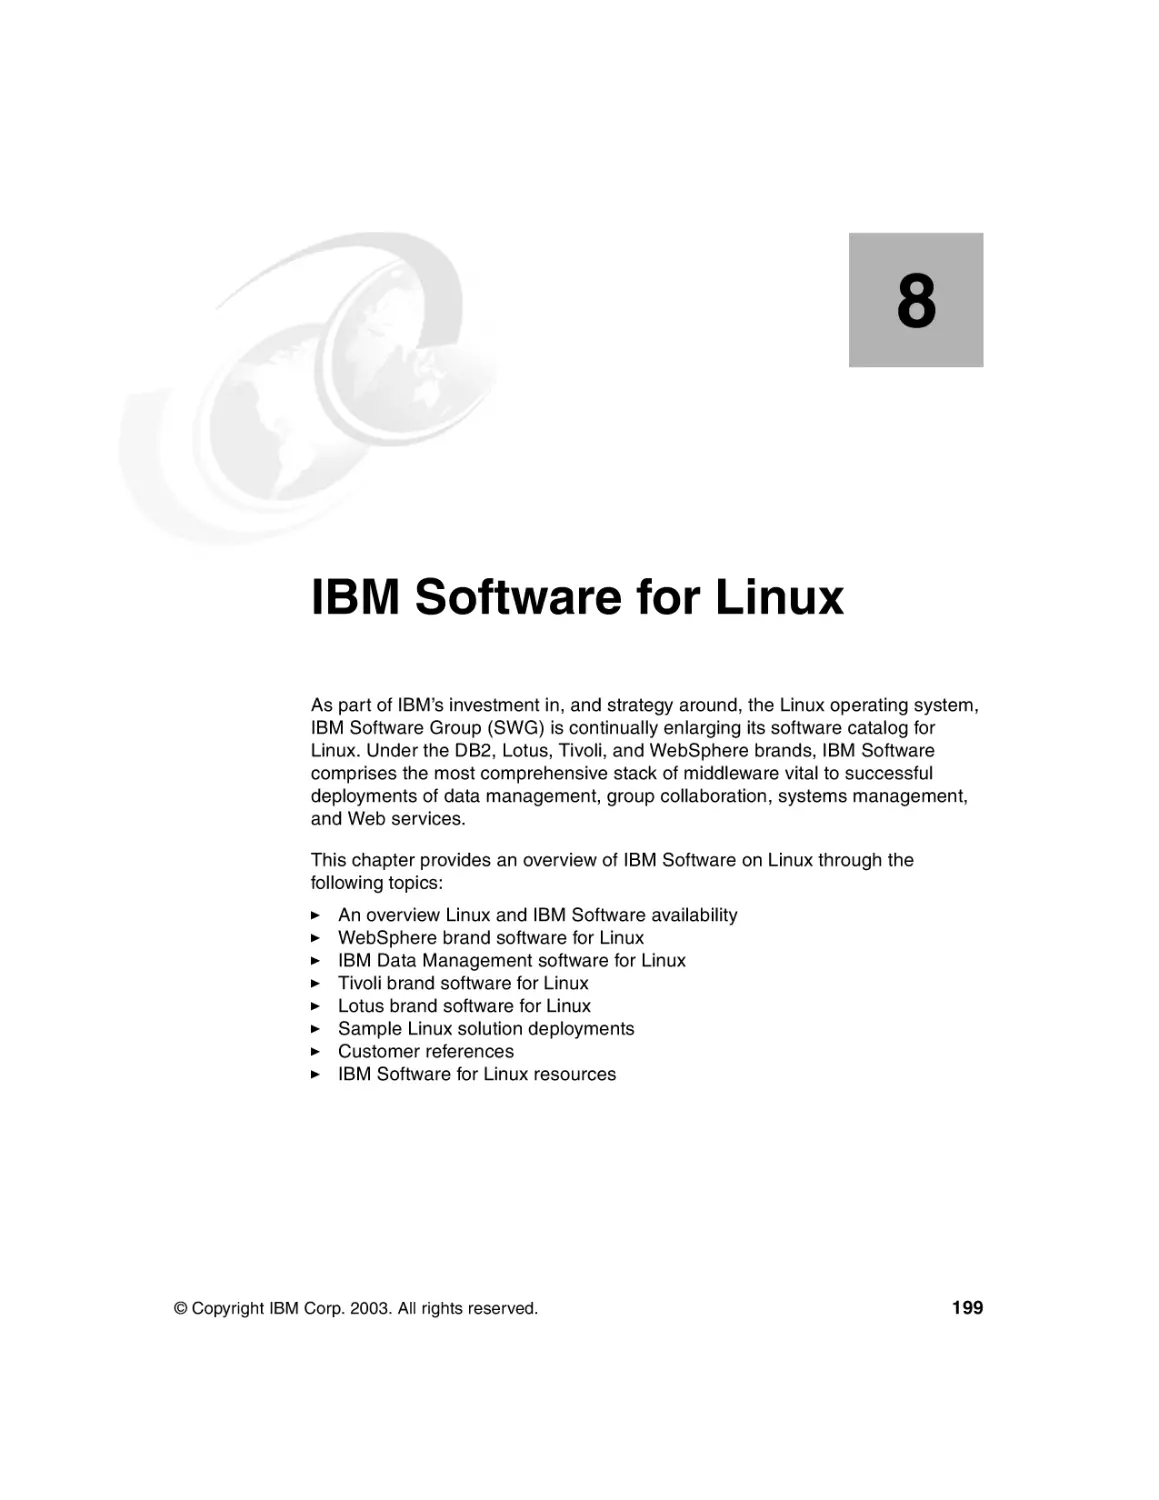 Chapter 8. IBM Software for Linux